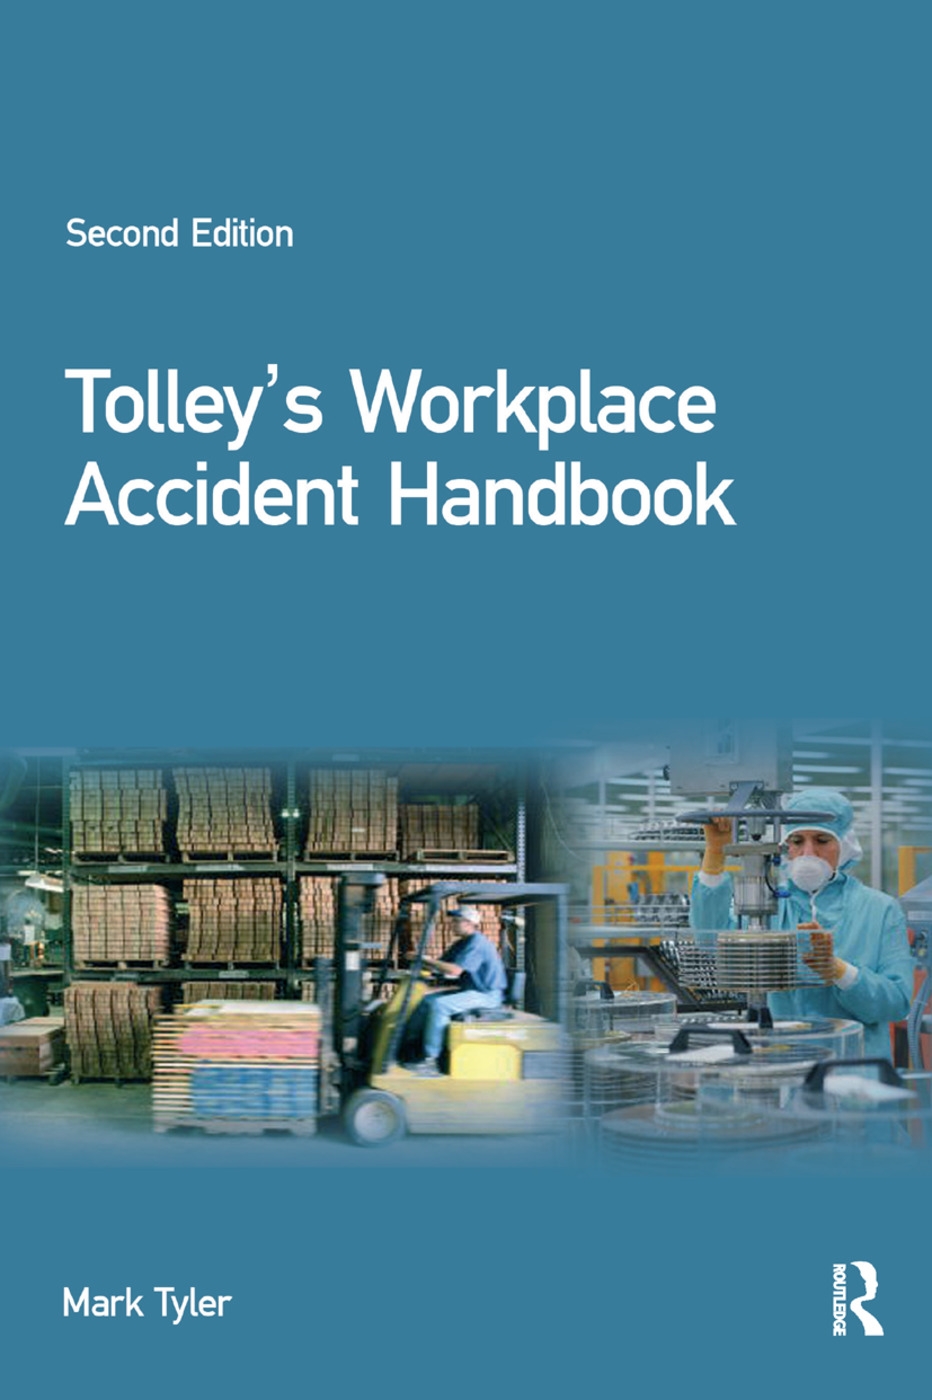 Tolley’s Workplace Accident Handbook